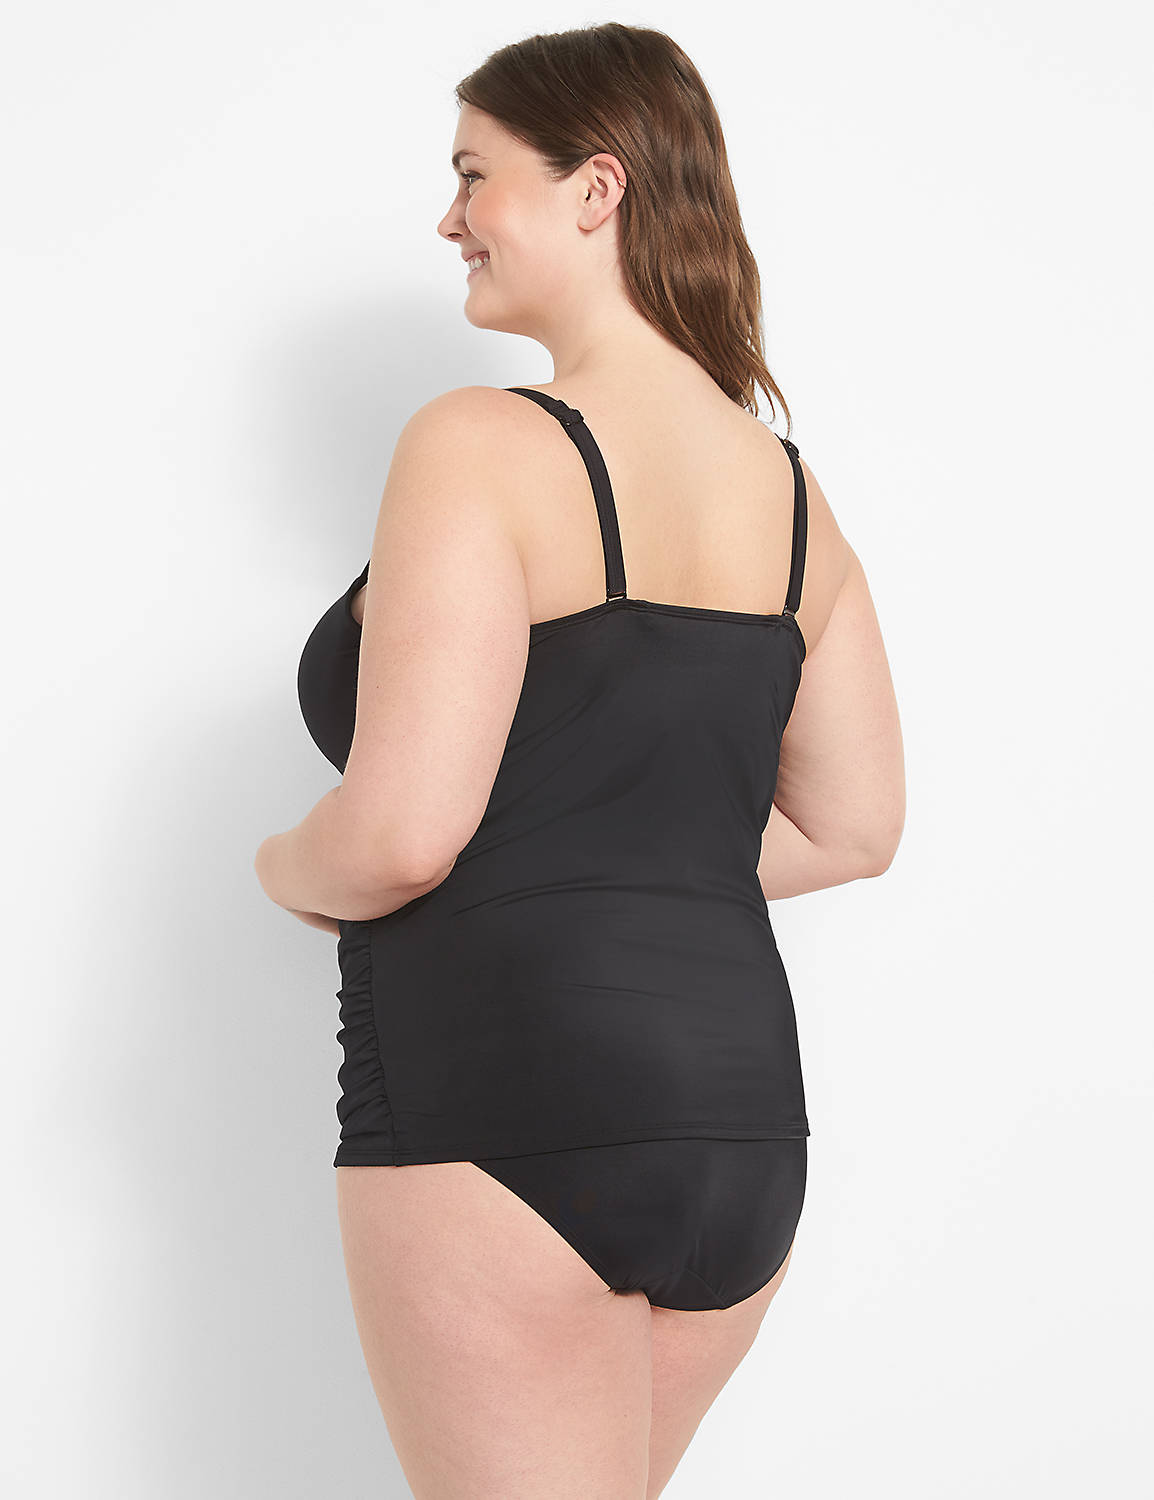 UW Fitted Tankini 1117753 Product Image 2